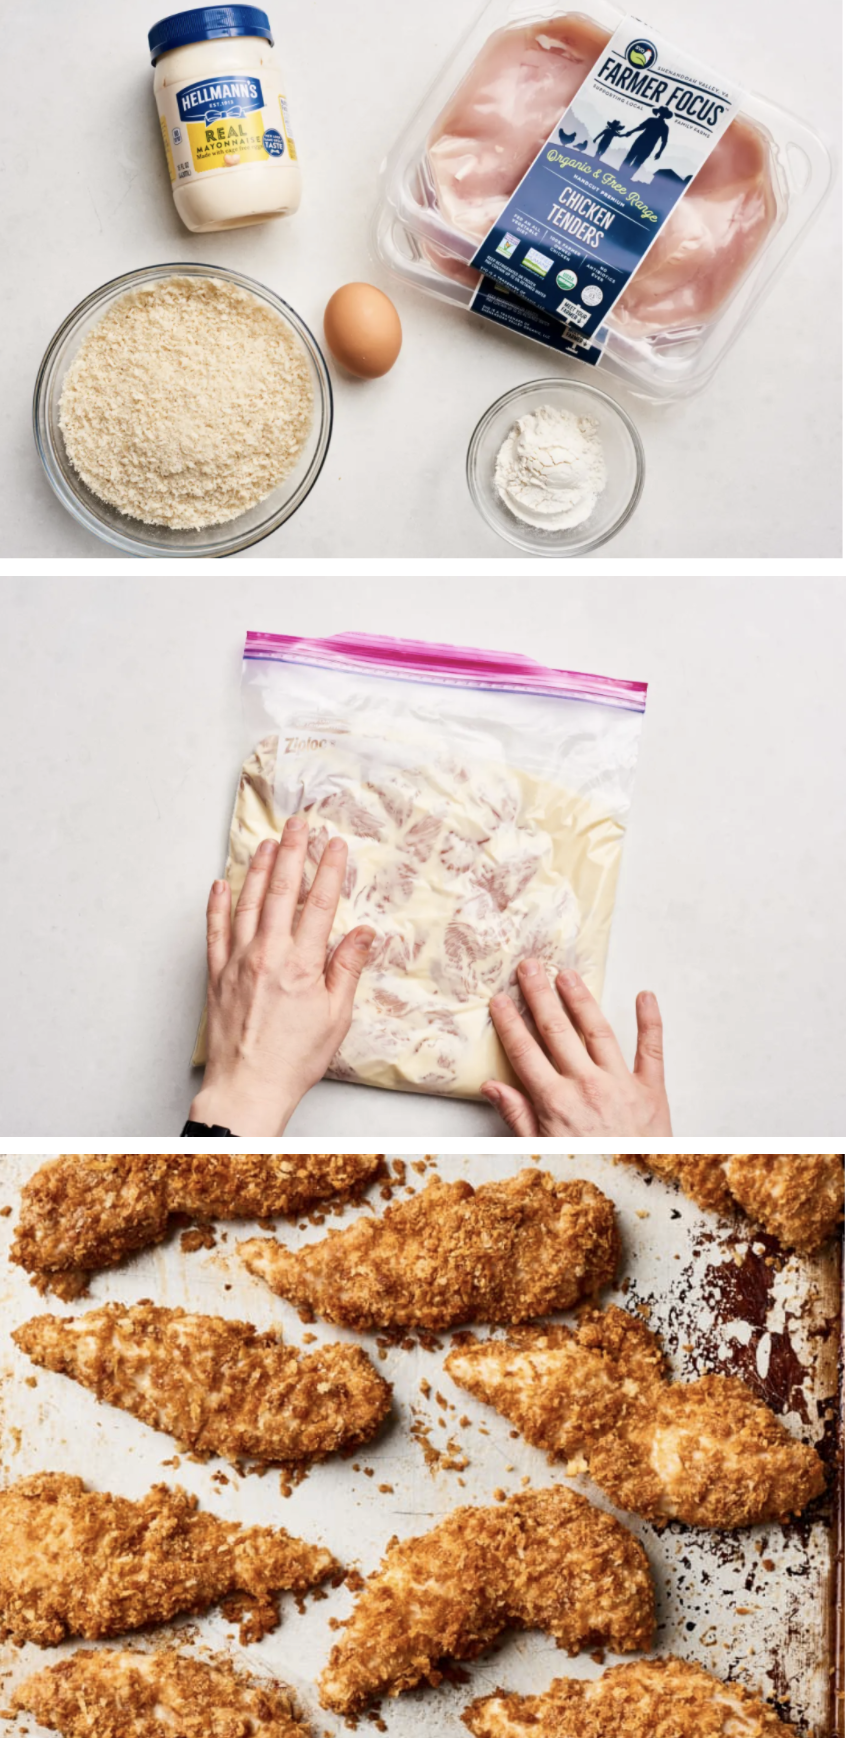 All of the necessary ingredients for making oven-baked crispy chicken